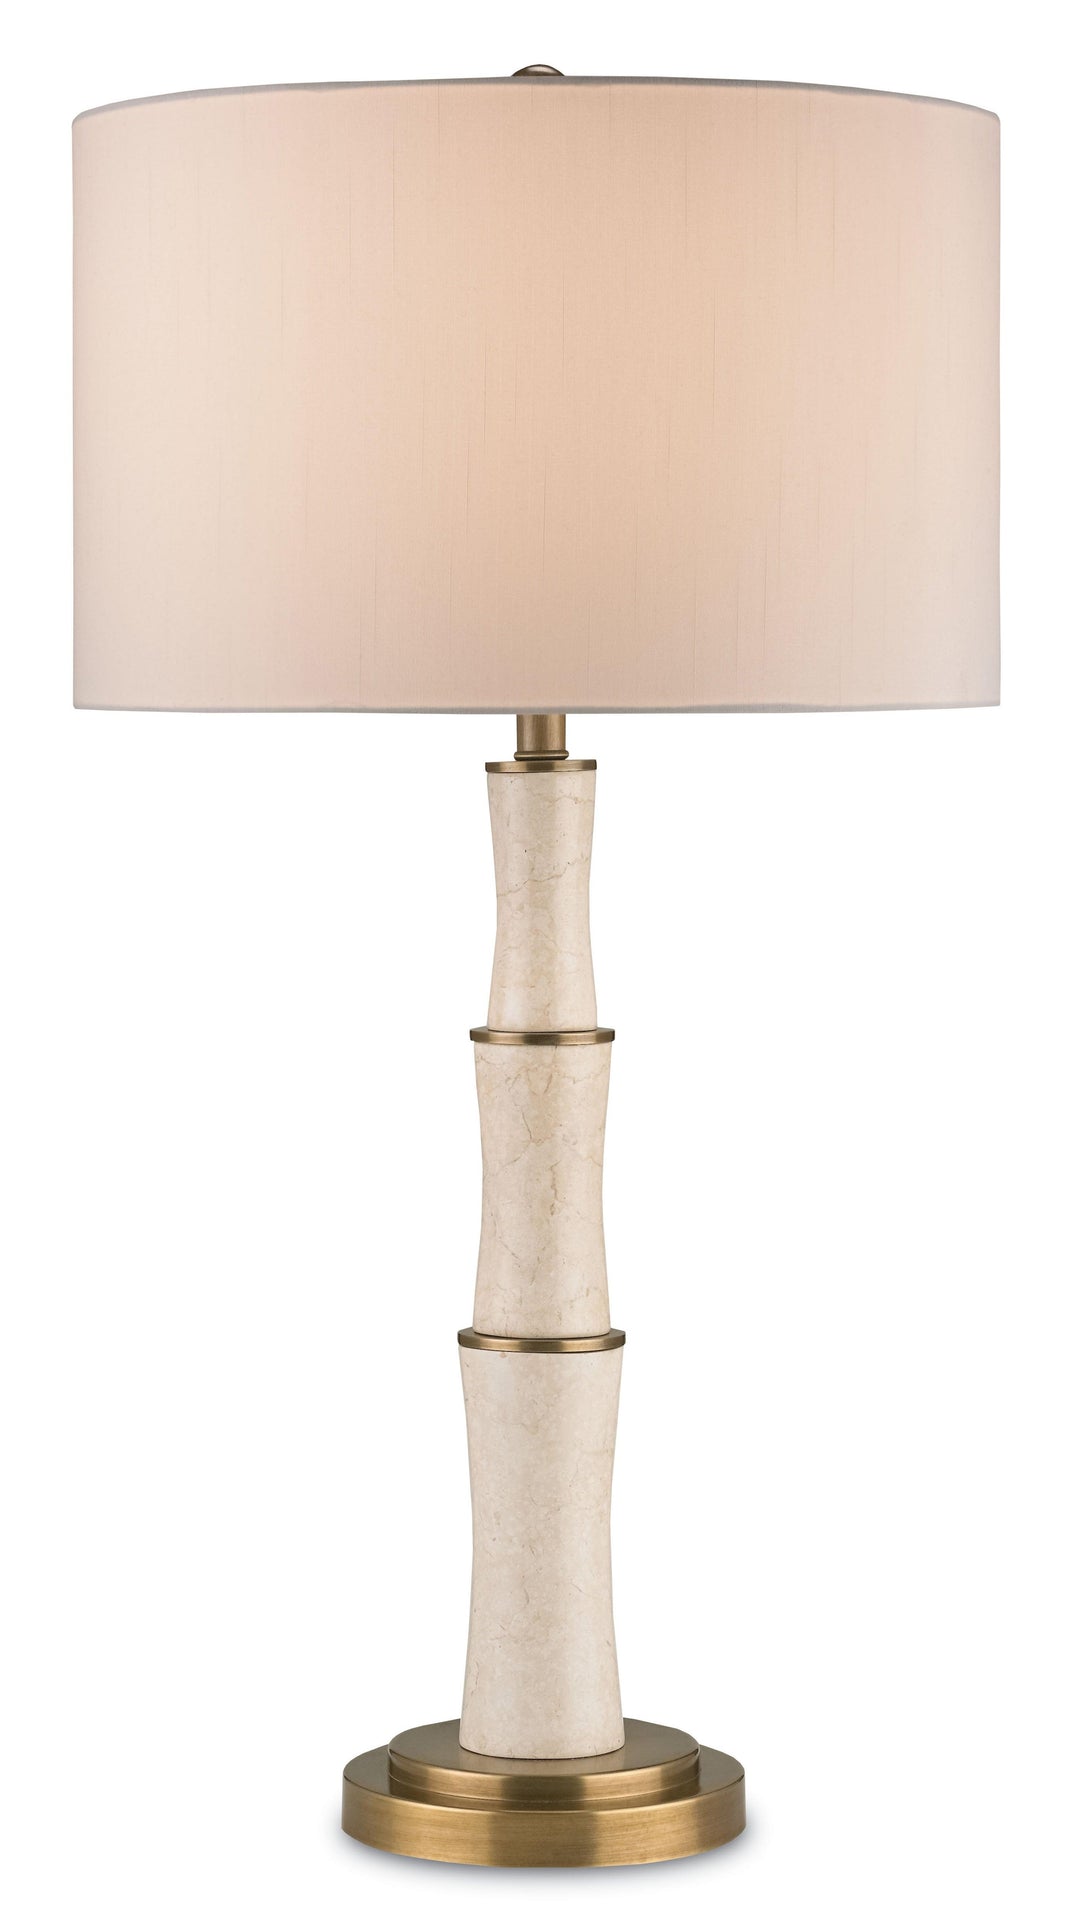 Colette Table Lamp - Casey & Company